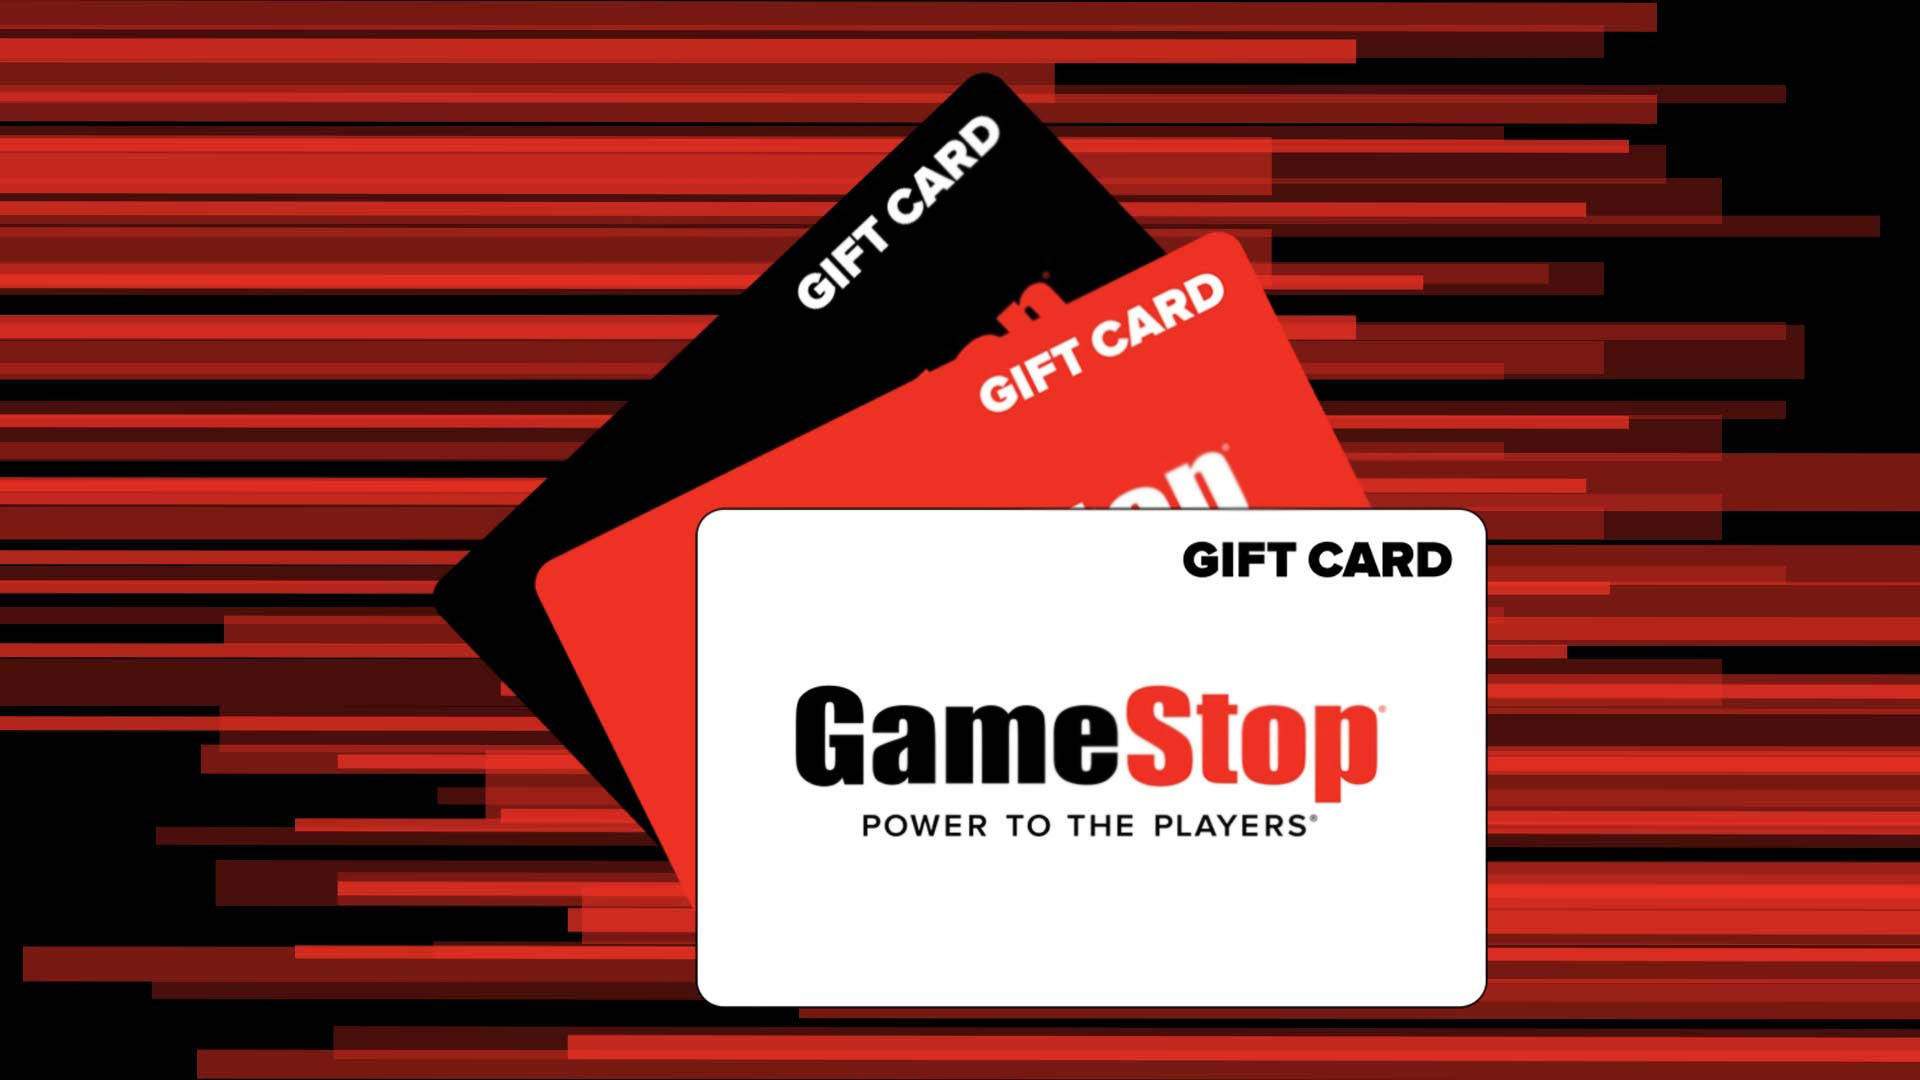 Gamestop Gift Cards Background